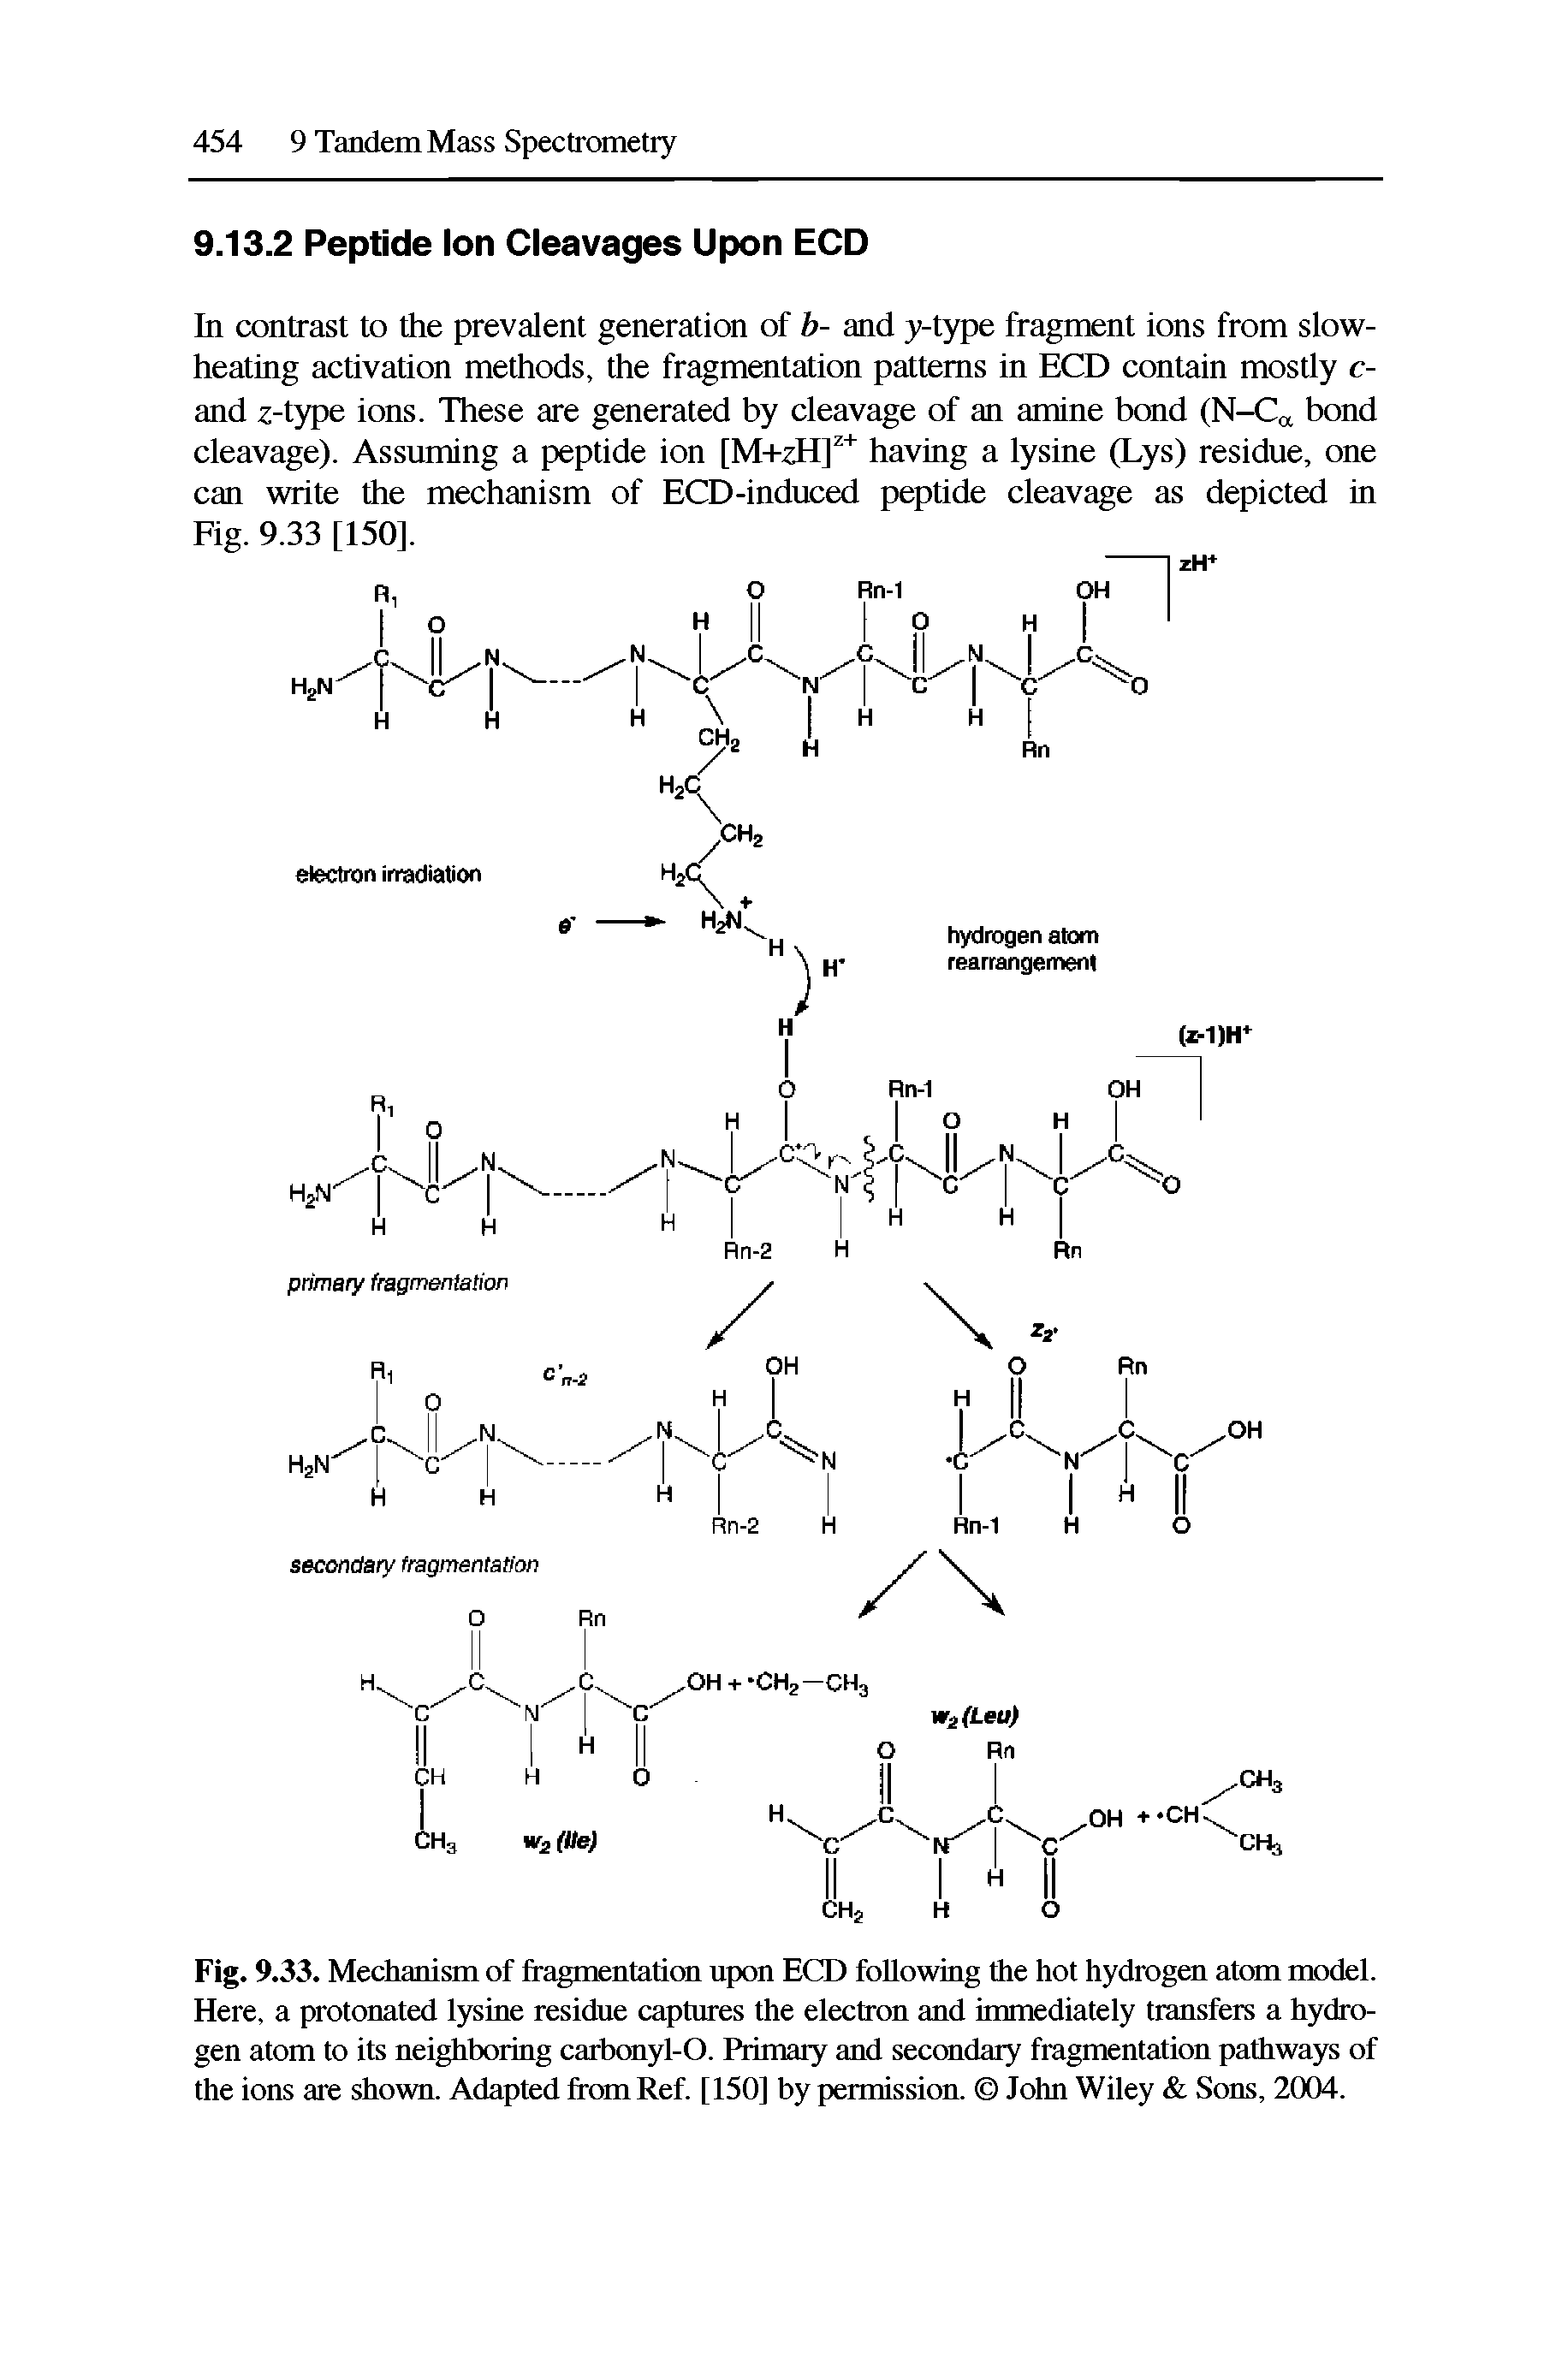 Fig. 9.33. Mechanism of fragmentation upon ECD following the hot hydrogen atom model. Here, a protonated lysine residue captures the electron and immediately transfers a hydrogen atom to its neighboring carbonyl-O. Primary and secondary fragmentation pathways of the ions are shown. Adapted from Ref. [150] by permissioiL John Wiley Sons, 2004.